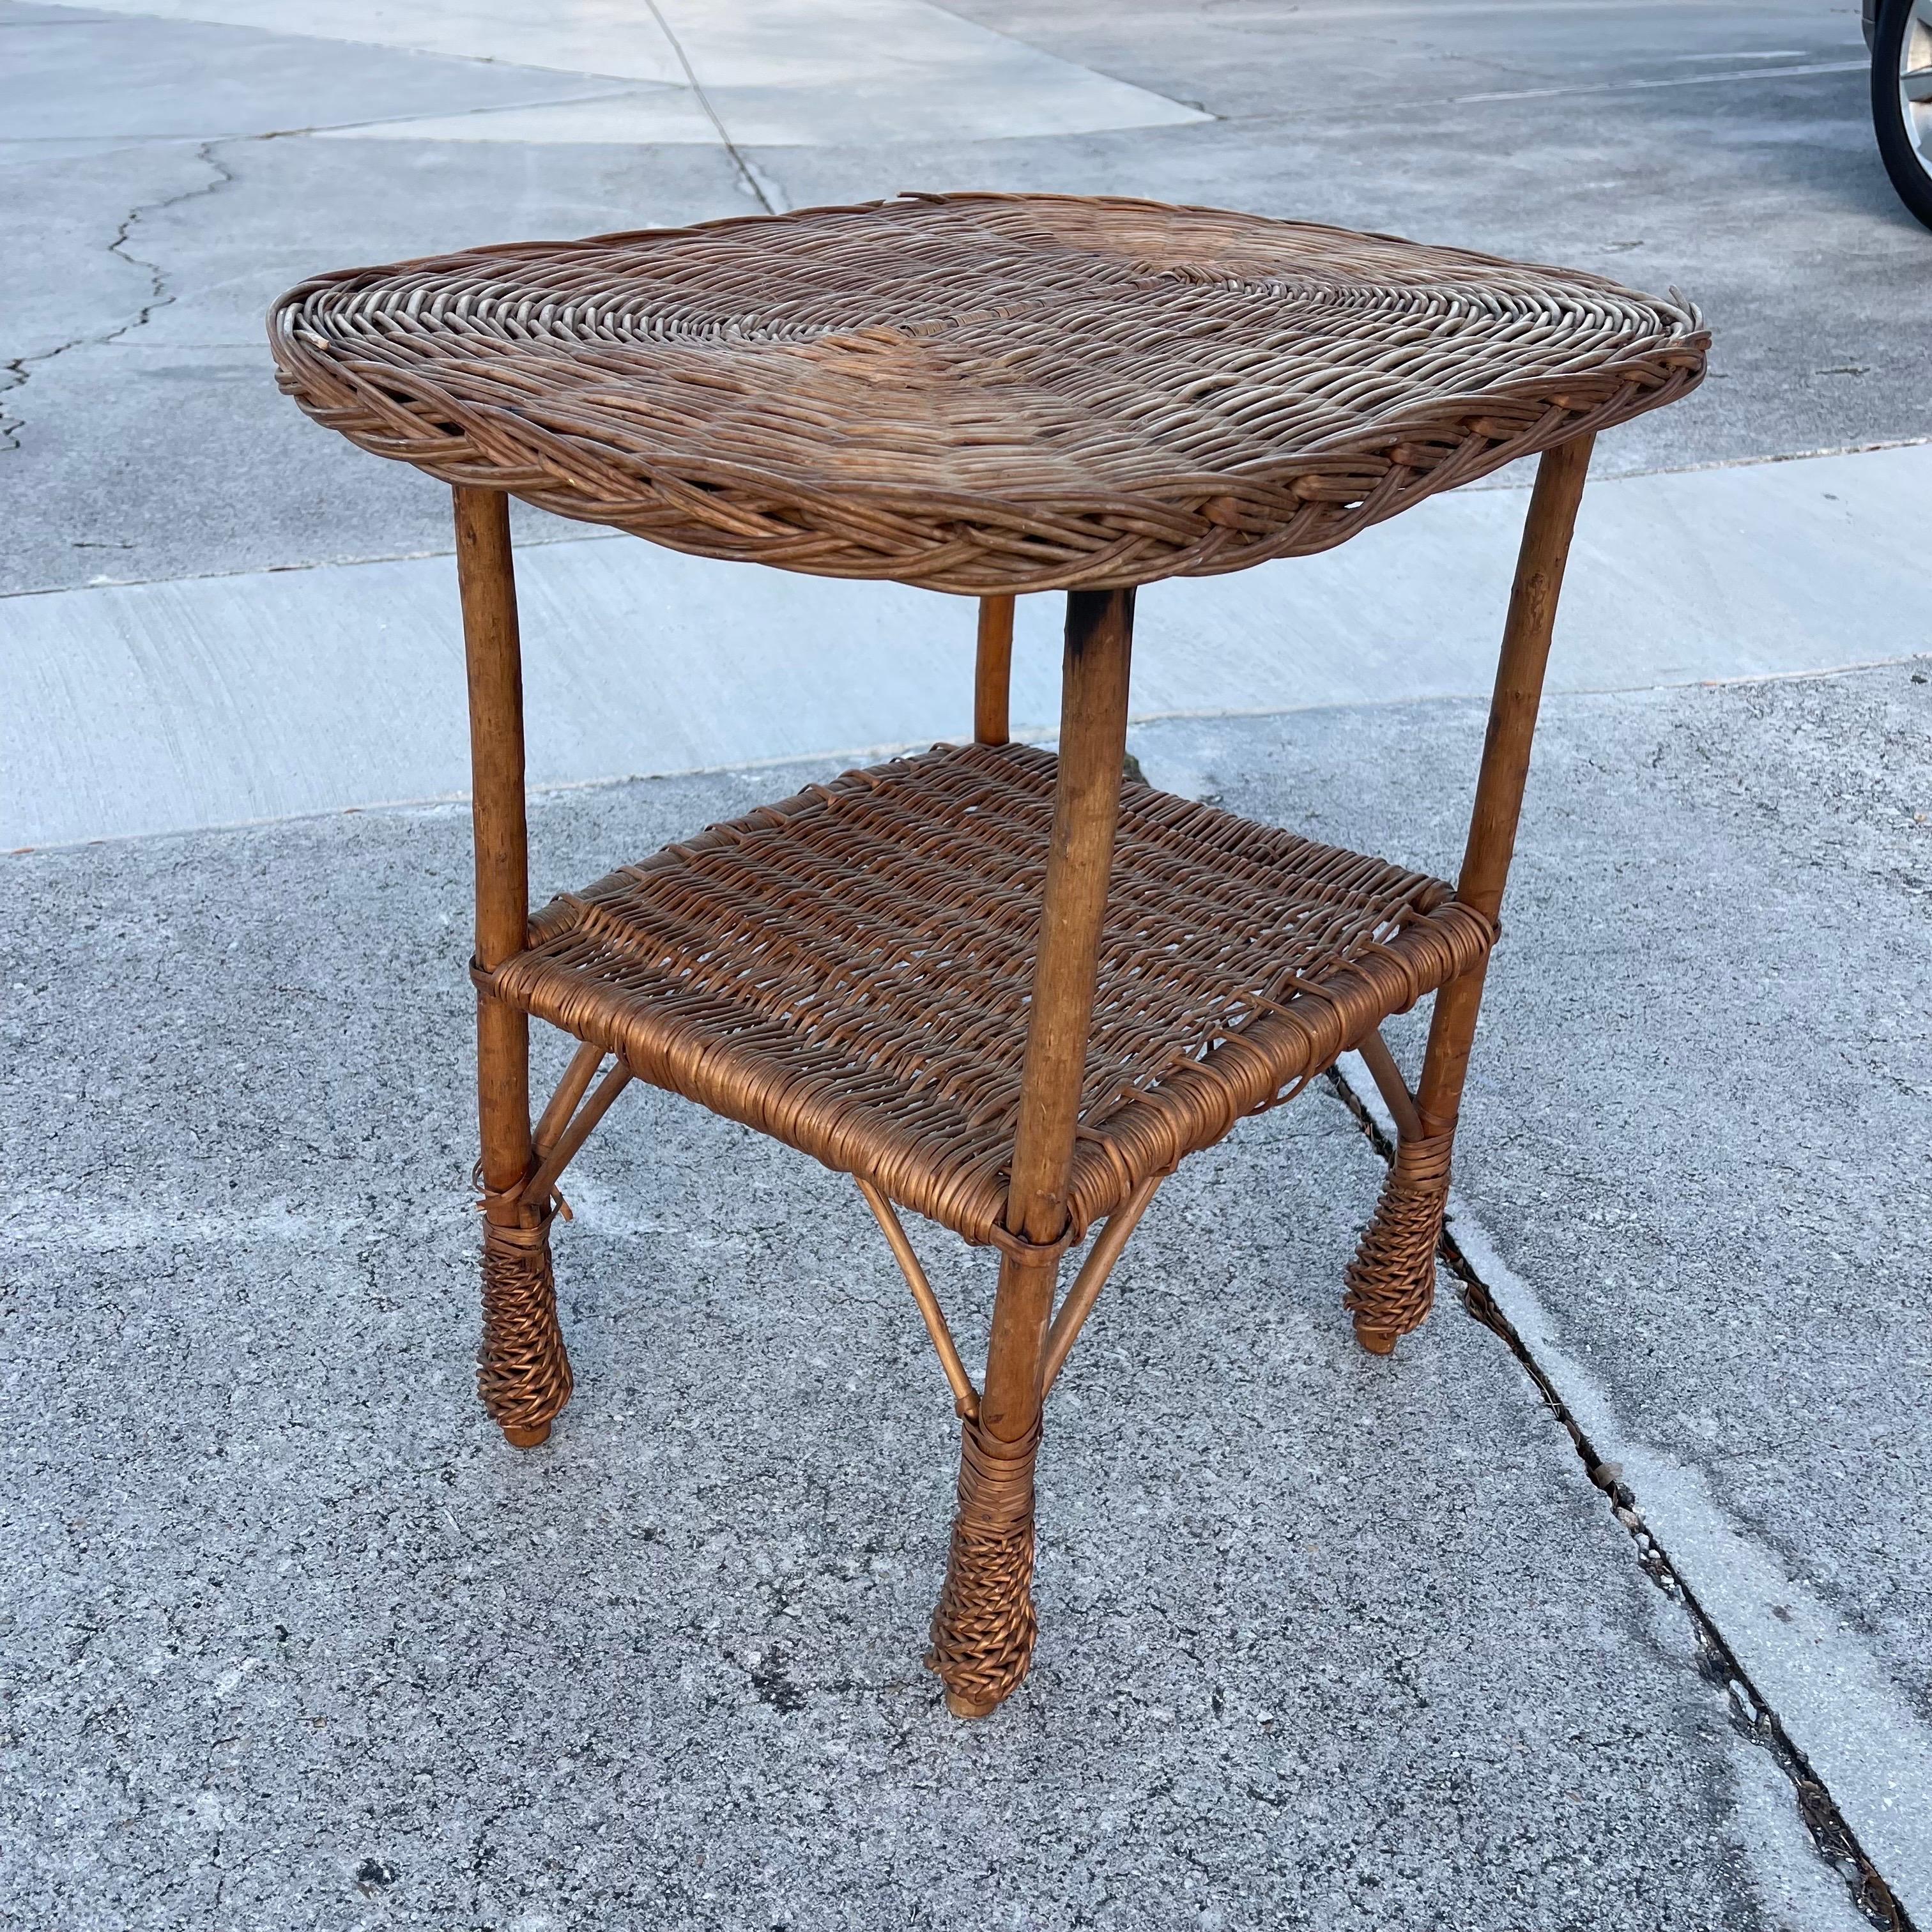 Mid-20th Century Woven Wicker Rattan Side Table In Good Condition For Sale In Jensen Beach, FL